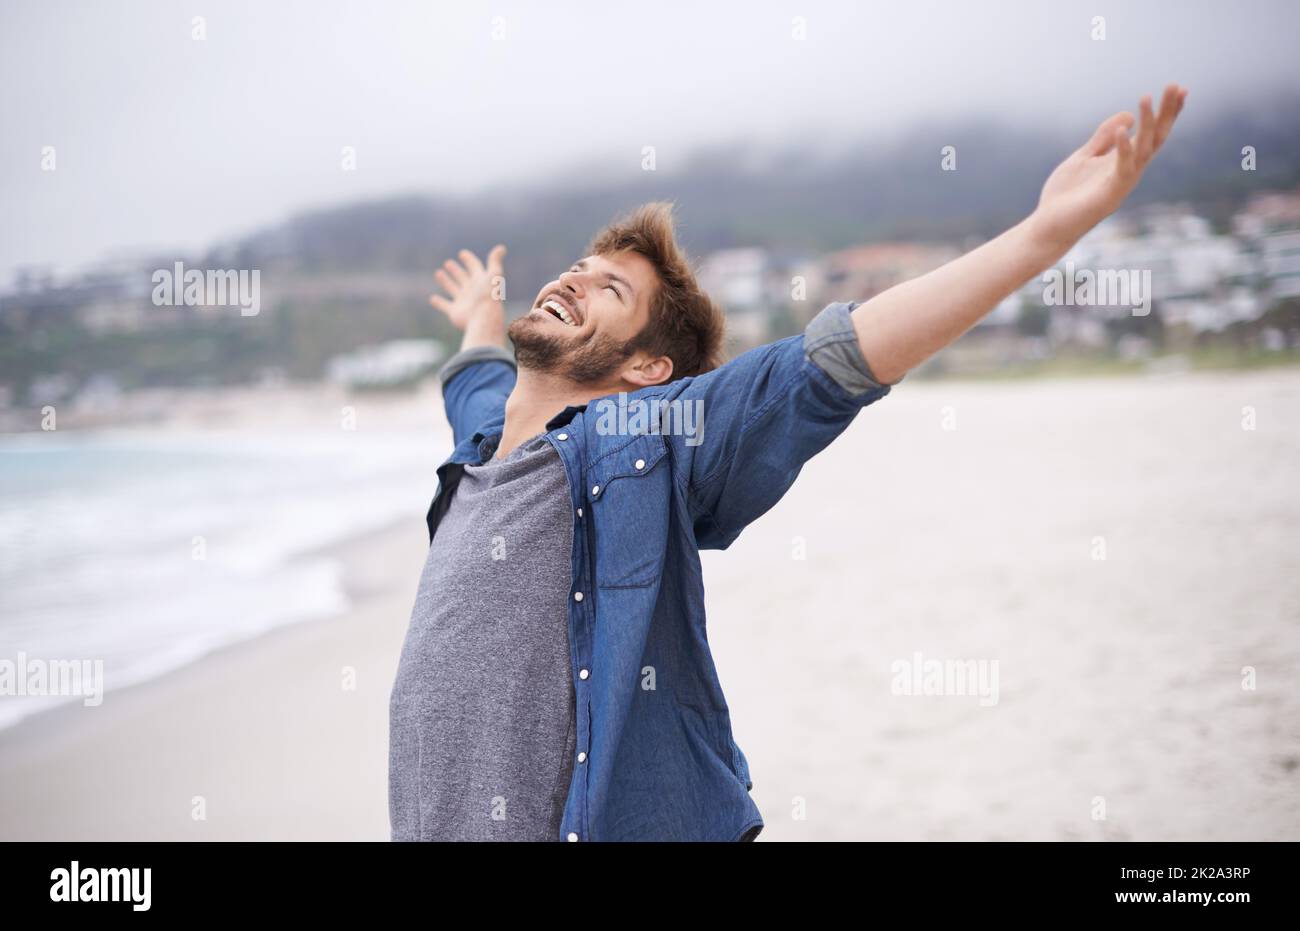 Aint life grand. Shot of a carefree young man throwing his arms back in joy. Stock Photo